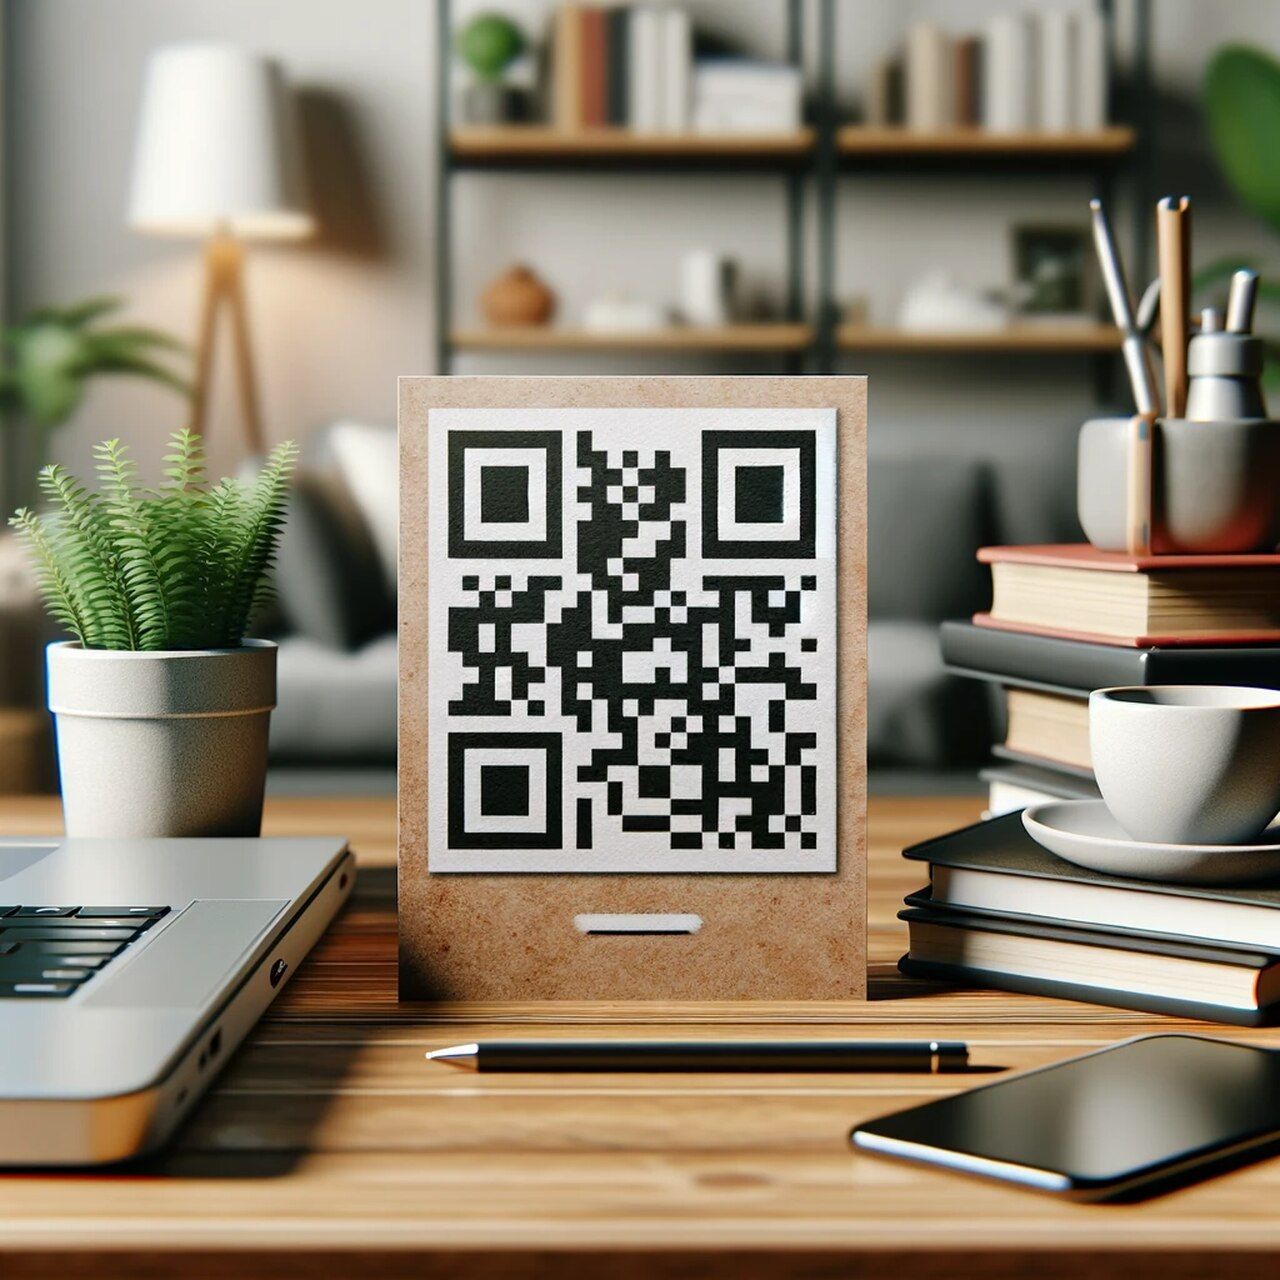 office desk with a QR code on it